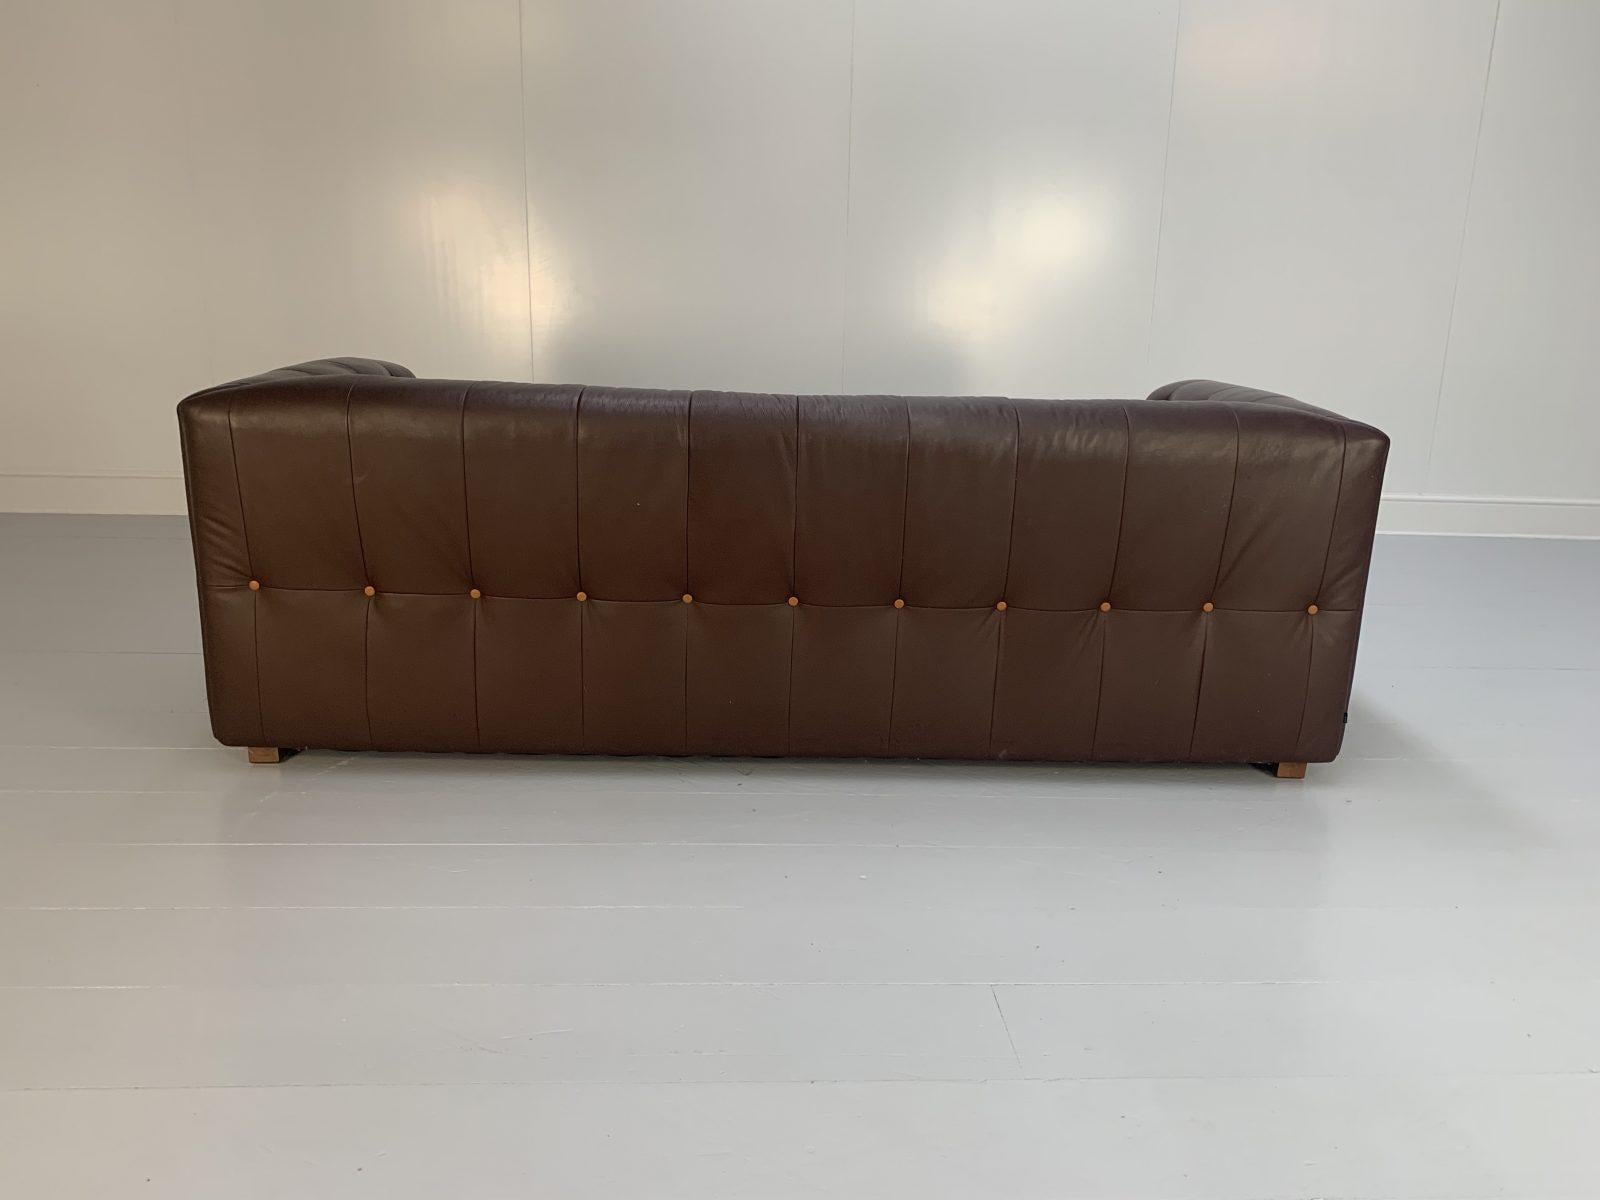 David Linley “Yoxford” Chesterfield 3-Seat Sofa in Brown Leather For Sale 3